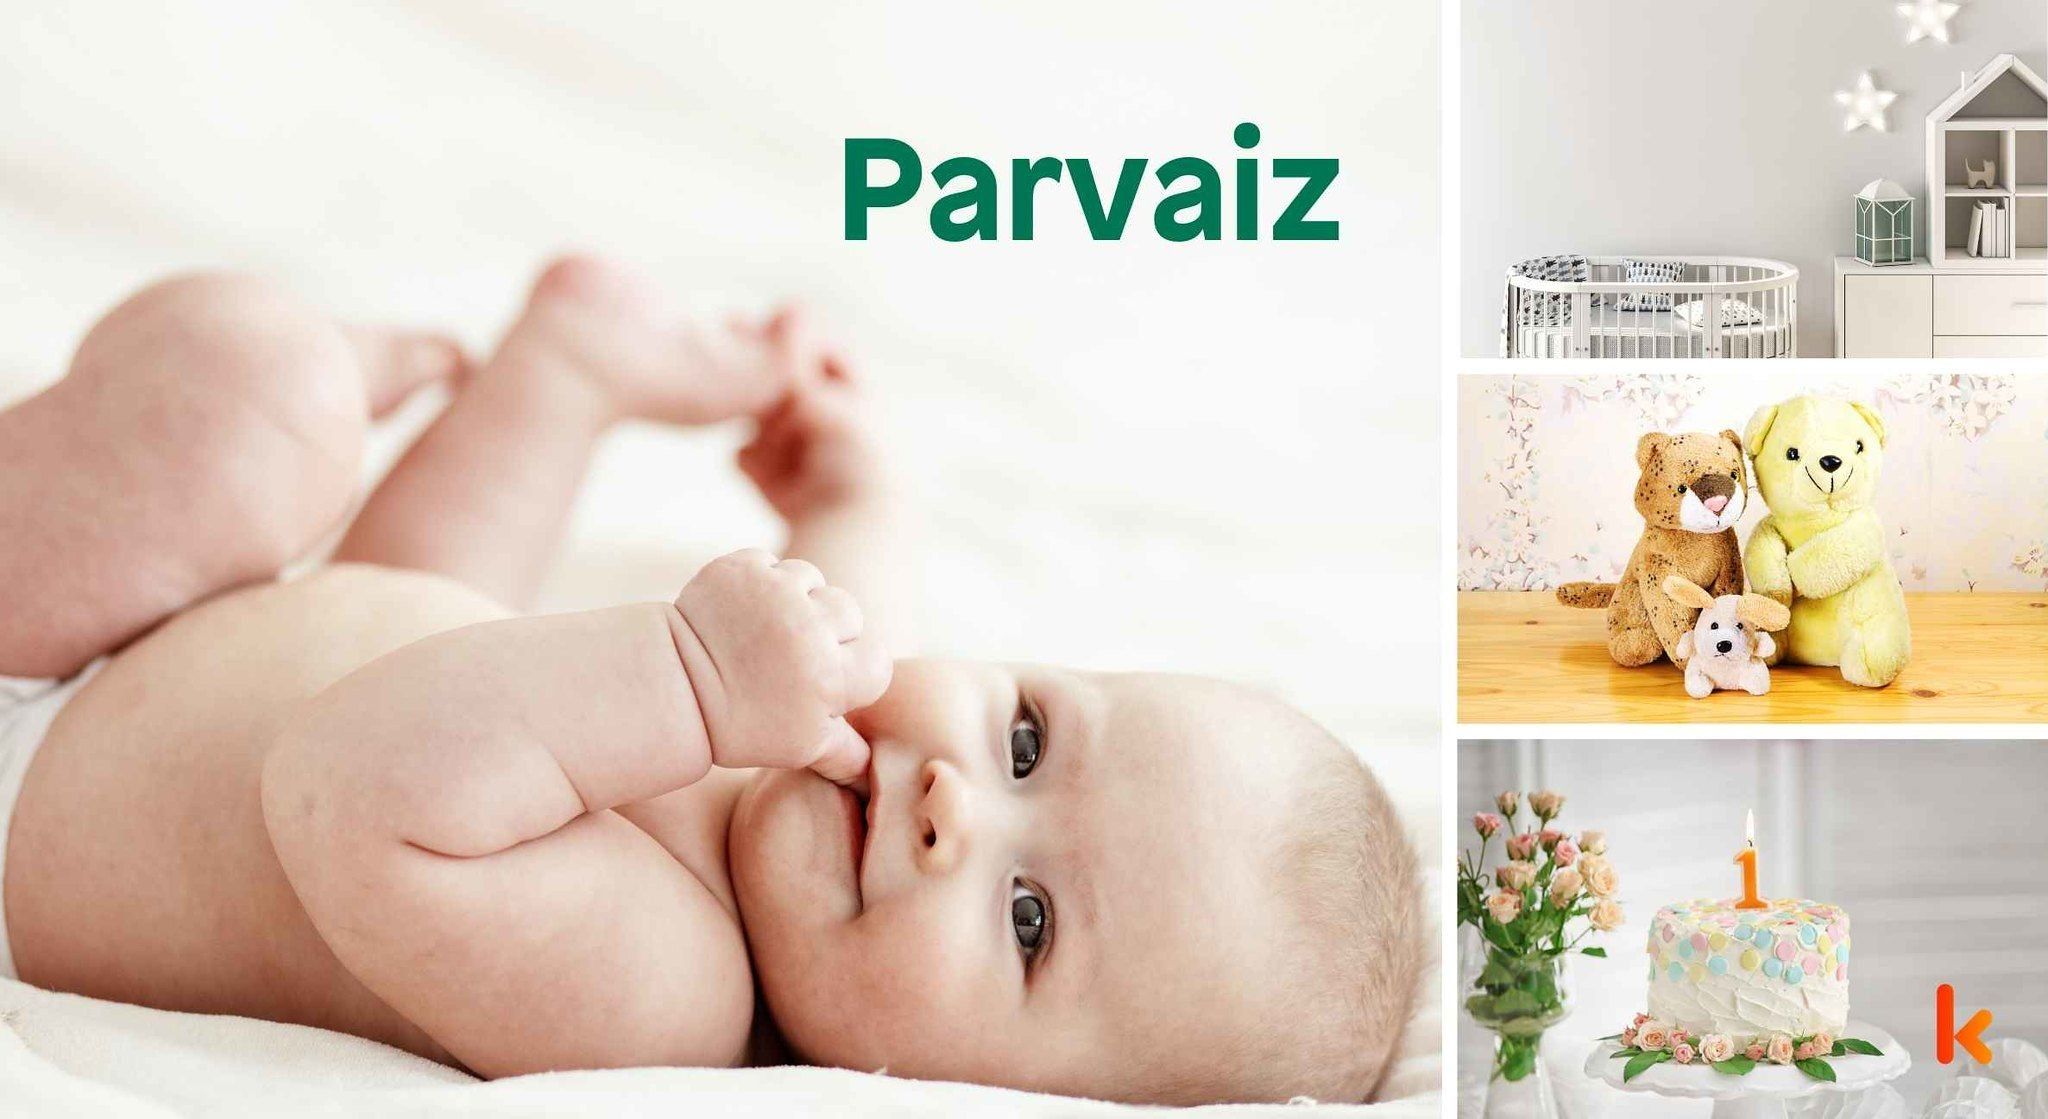 Meaning of the name Parvaiz